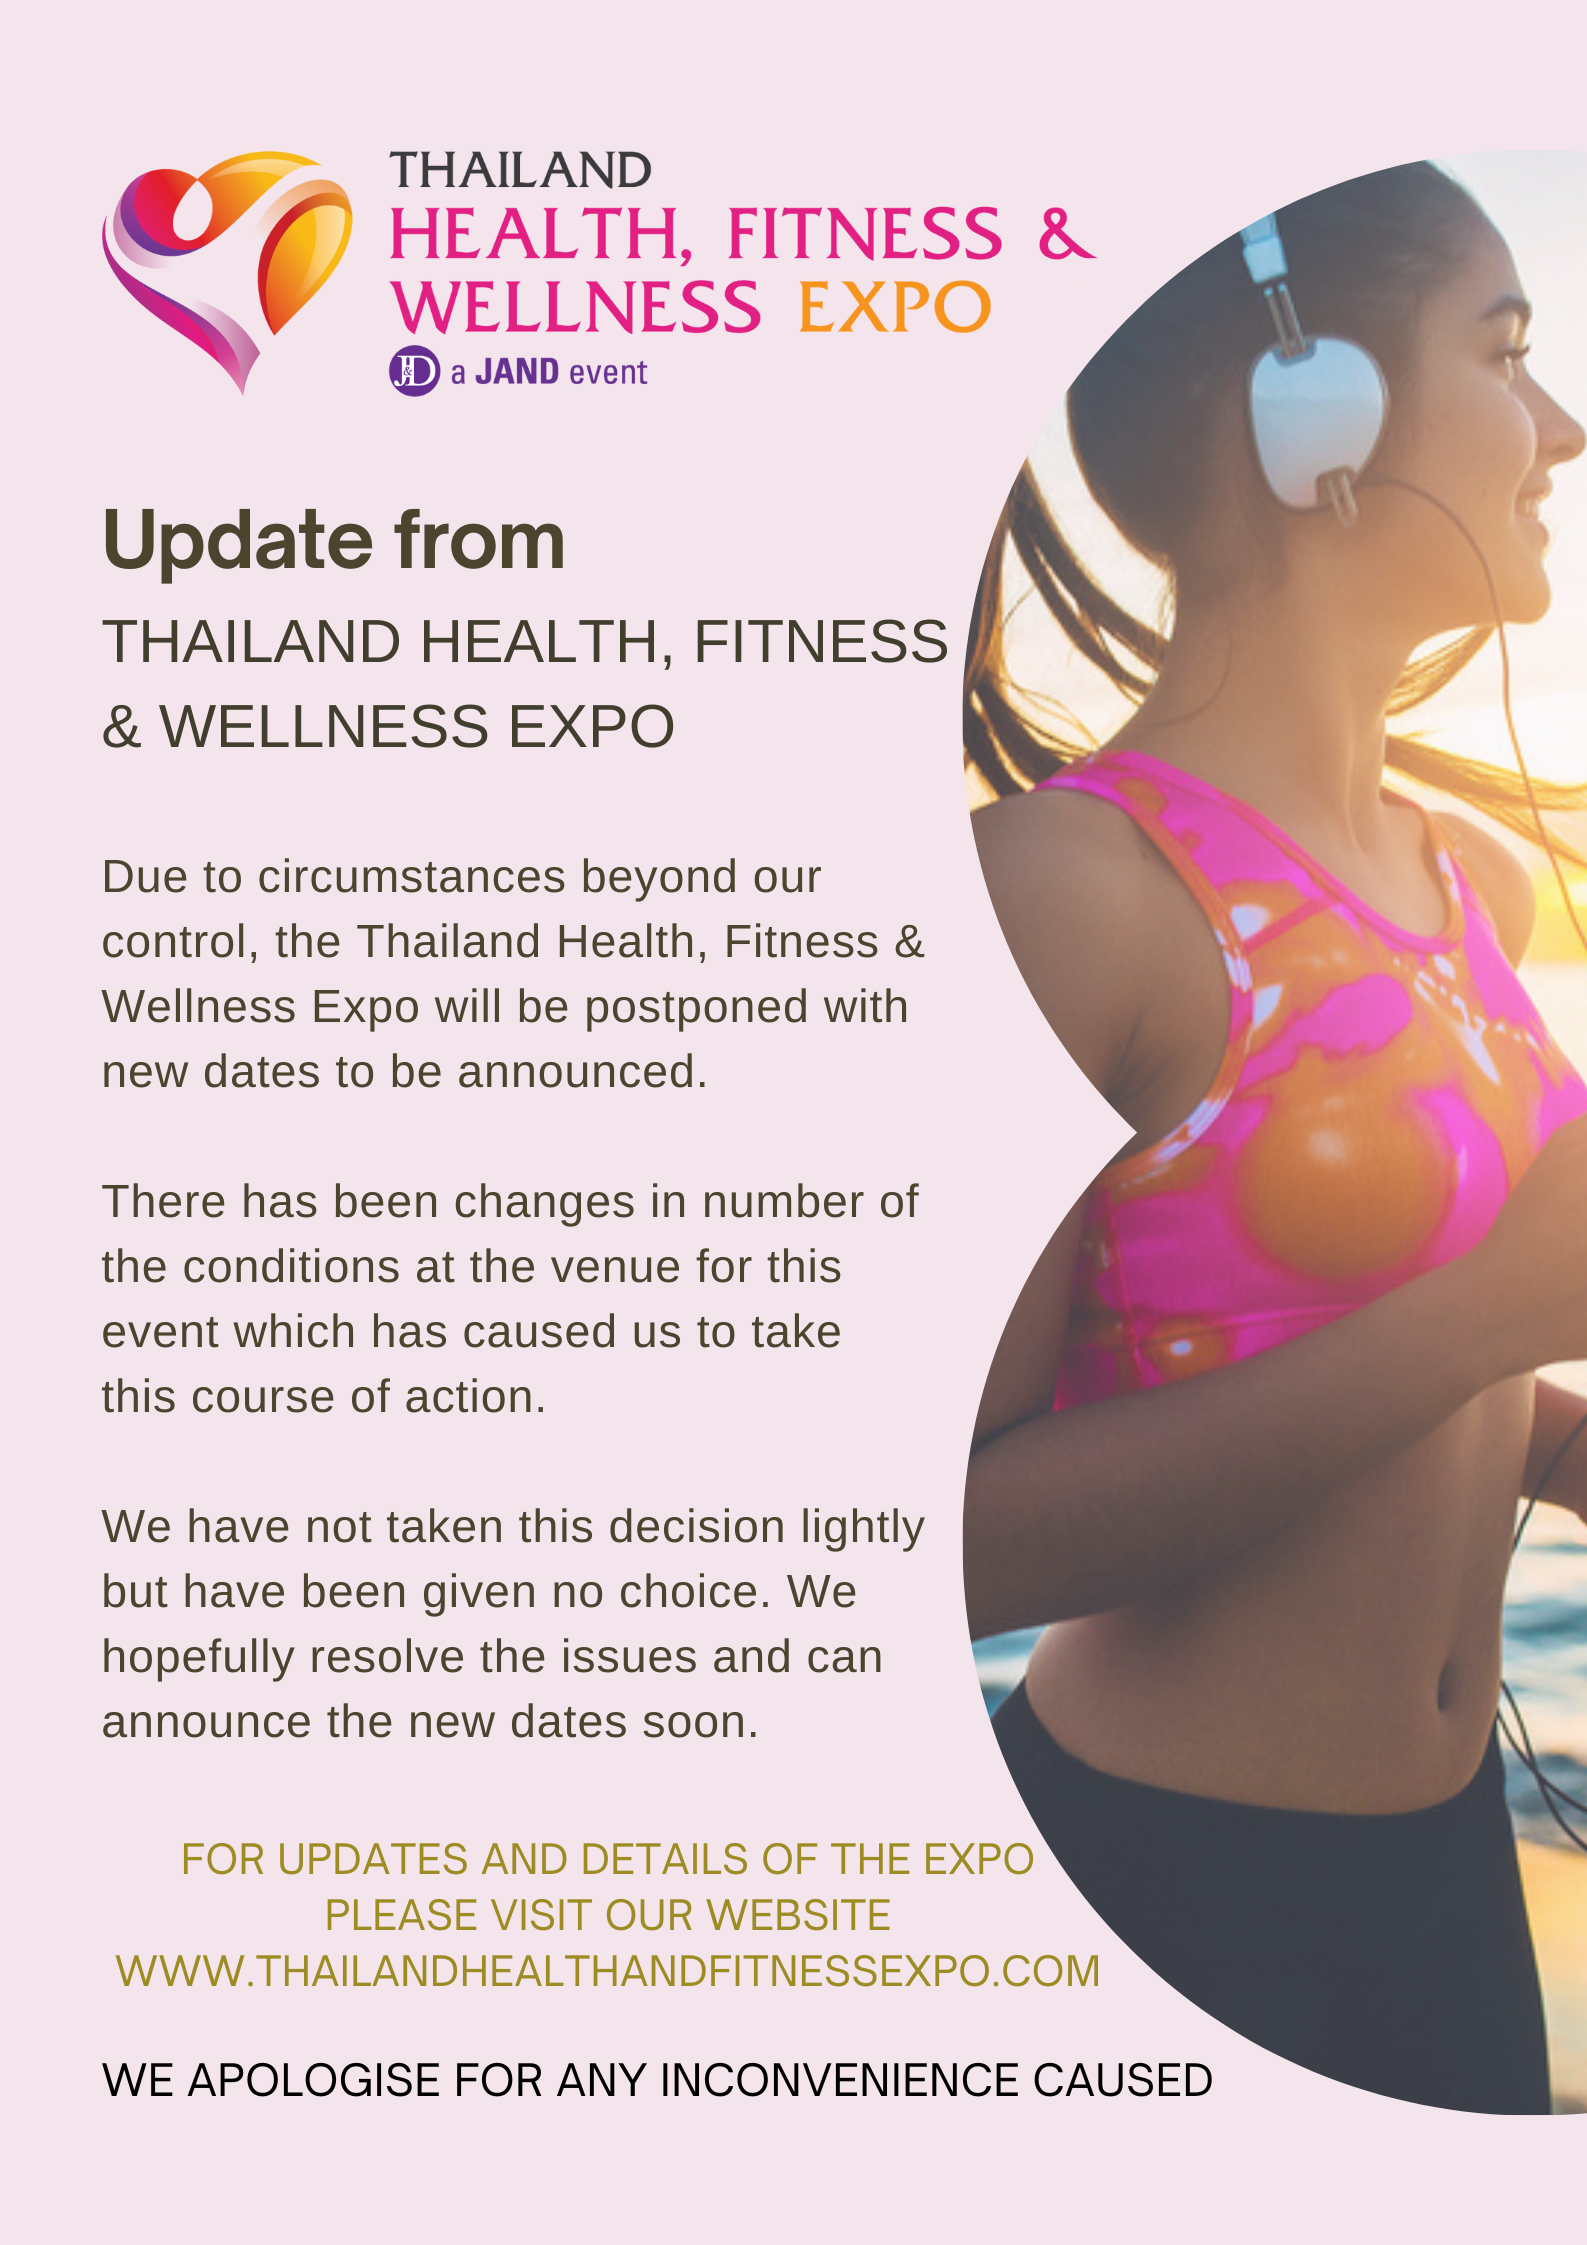 Update from Thailand Health & Fitness & Wellness Expo